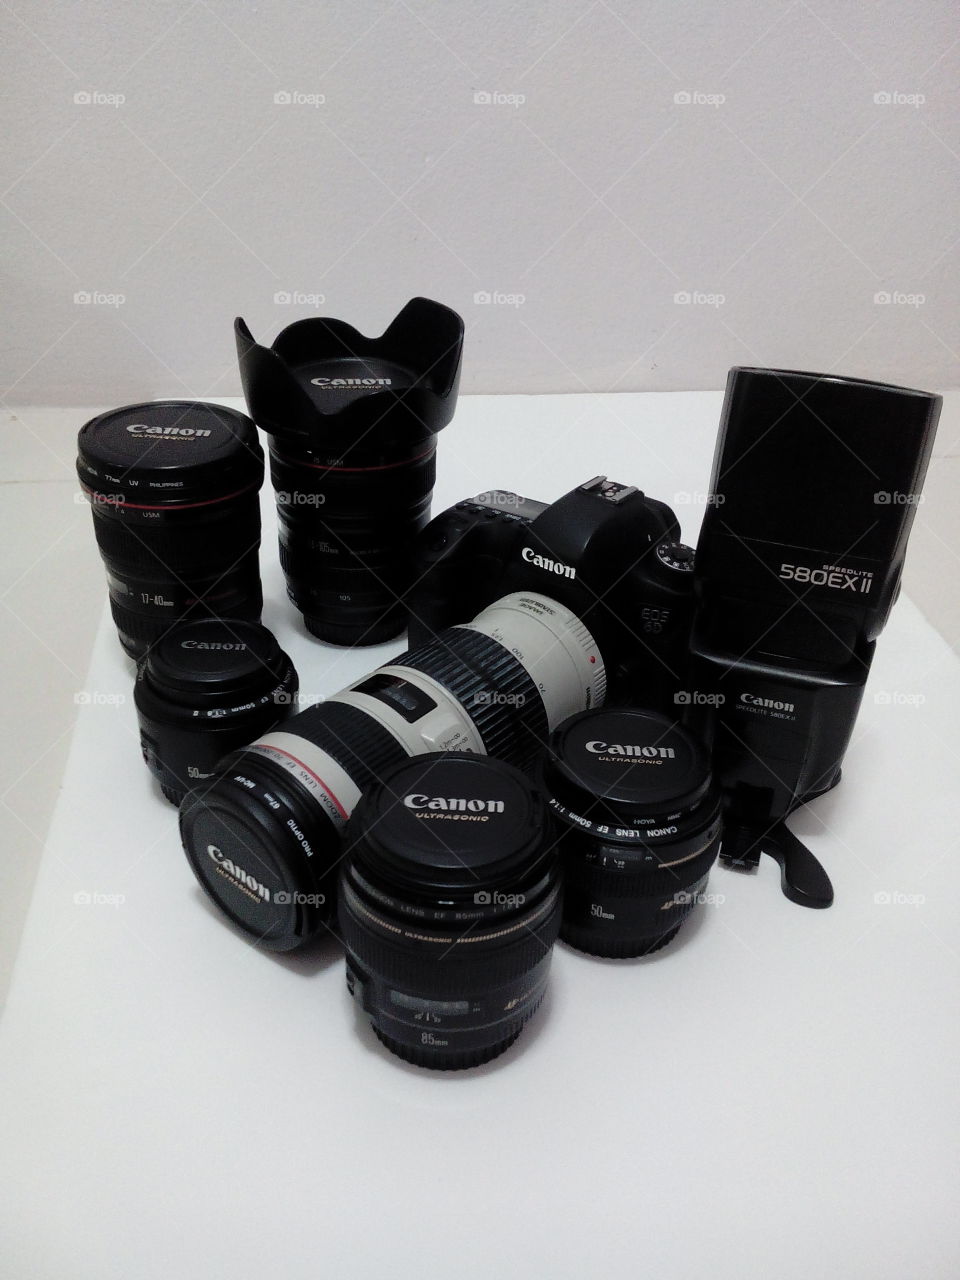 Photographt gear, camera lenses and flash. Gear acquisition syndrome?